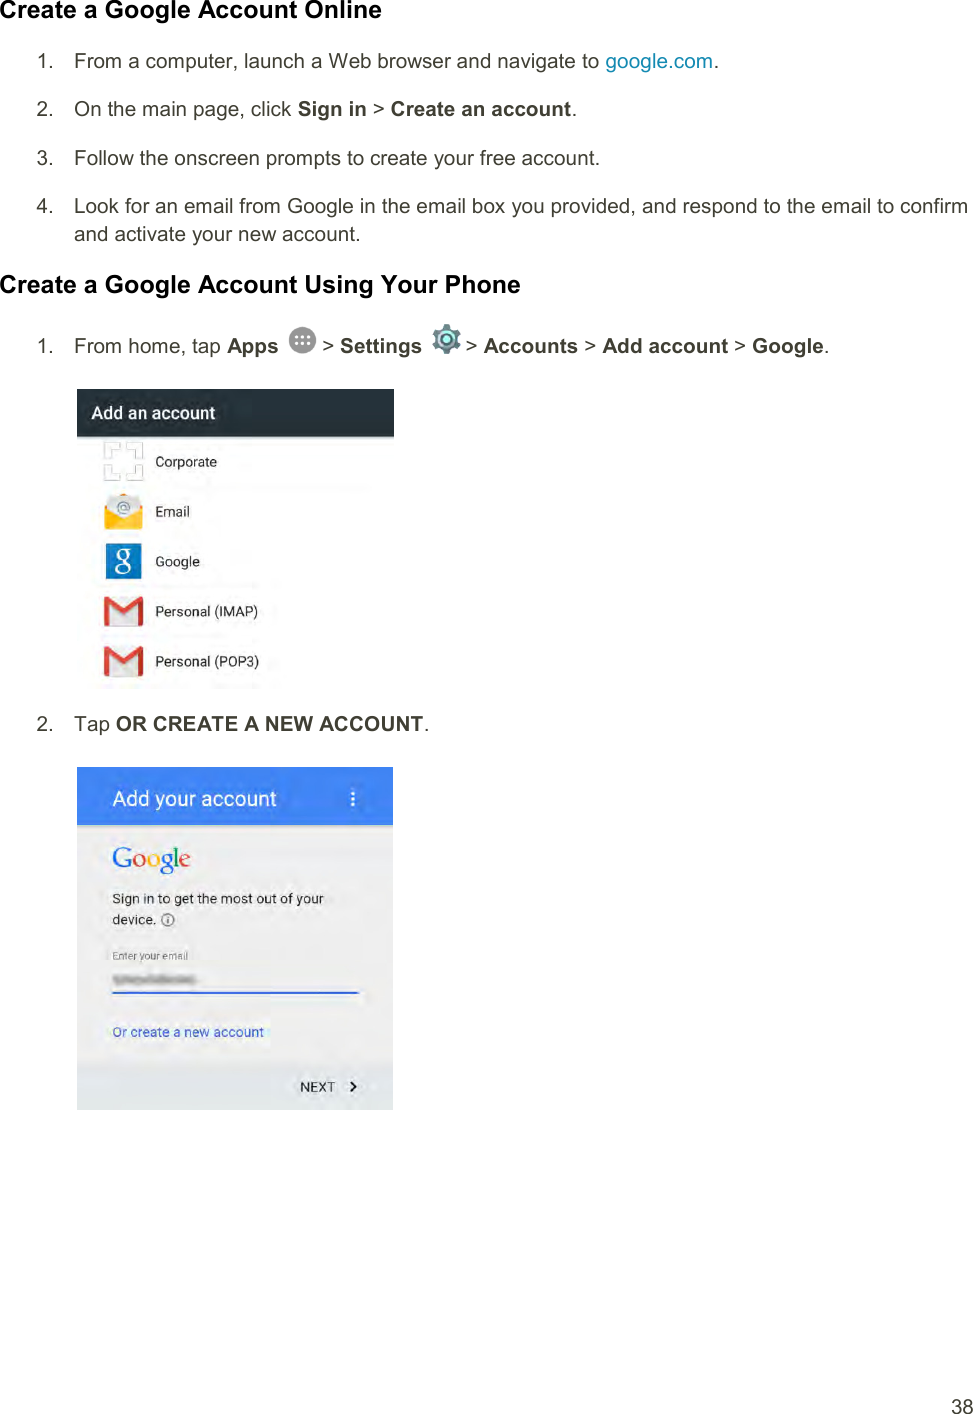  38 Create a Google Account Online 1.  From a computer, launch a Web browser and navigate to google.com. 2.  On the main page, click Sign in &gt; Create an account. 3.  Follow the onscreen prompts to create your free account. 4.  Look for an email from Google in the email box you provided, and respond to the email to confirm and activate your new account. Create a Google Account Using Your Phone 1.  From home, tap Apps   &gt; Settings   &gt; Accounts &gt; Add account &gt; Google.   2.  Tap OR CREATE A NEW ACCOUNT.   